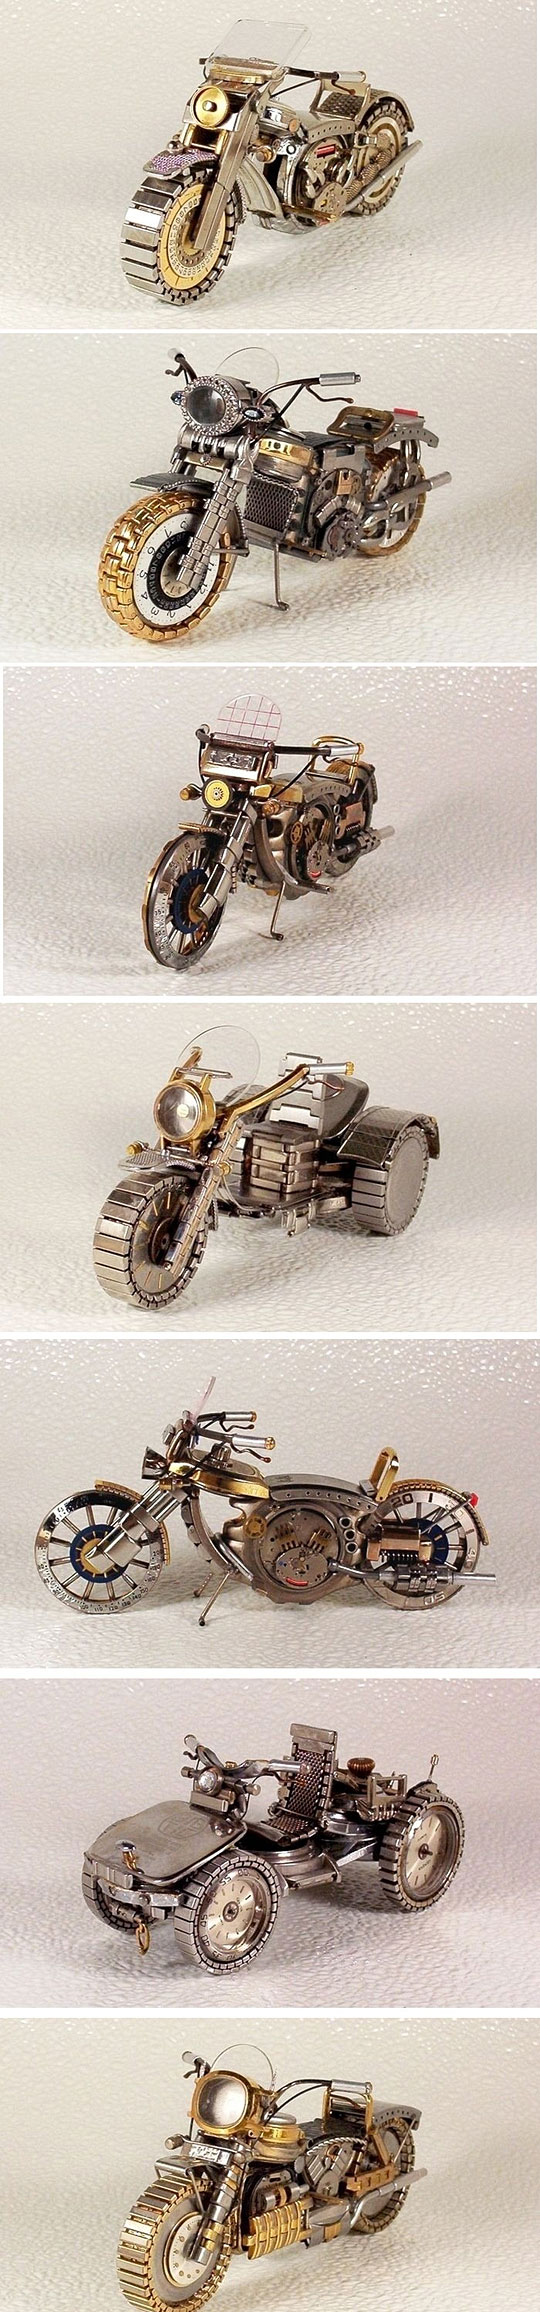 Bikes made from old watches